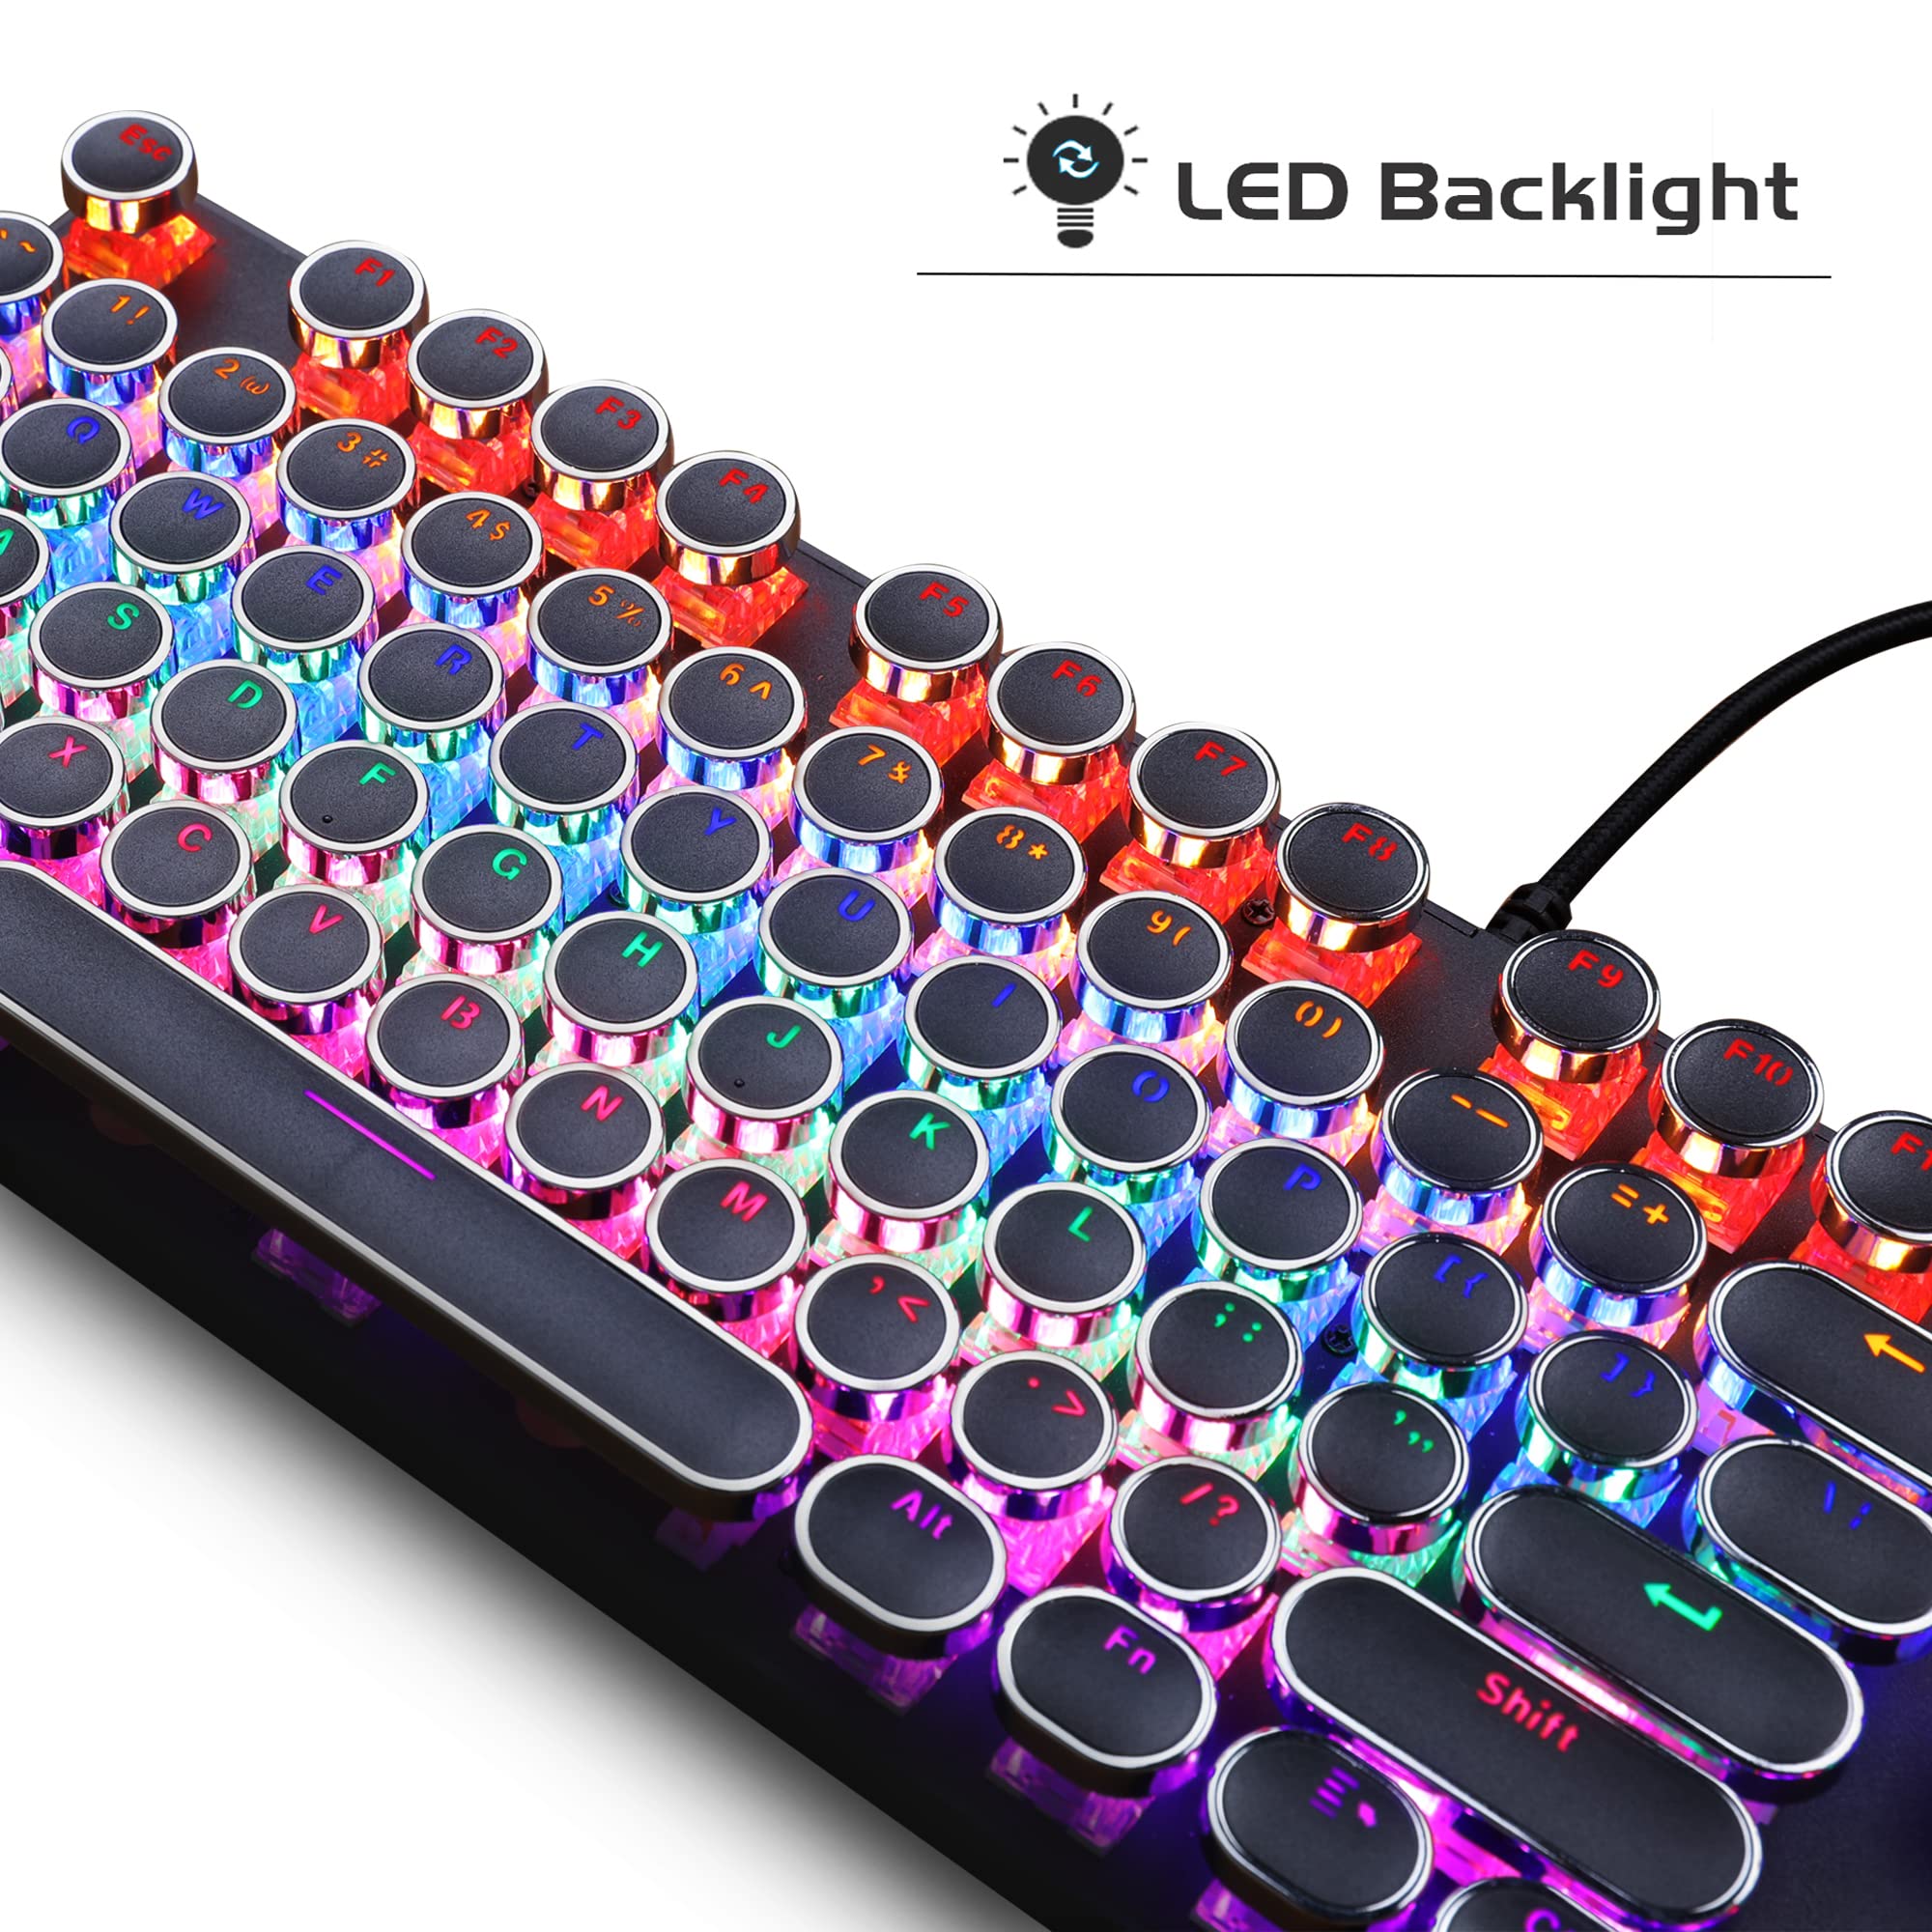 MageGee Typewriter Mechanical Gaming Keyboard, Retro Punk Round Keycaps with RGB Rainbow Backlit USB Wired Keyboards for Game and Office, for Windows Laptop PC Mac - Blue Switches/Black